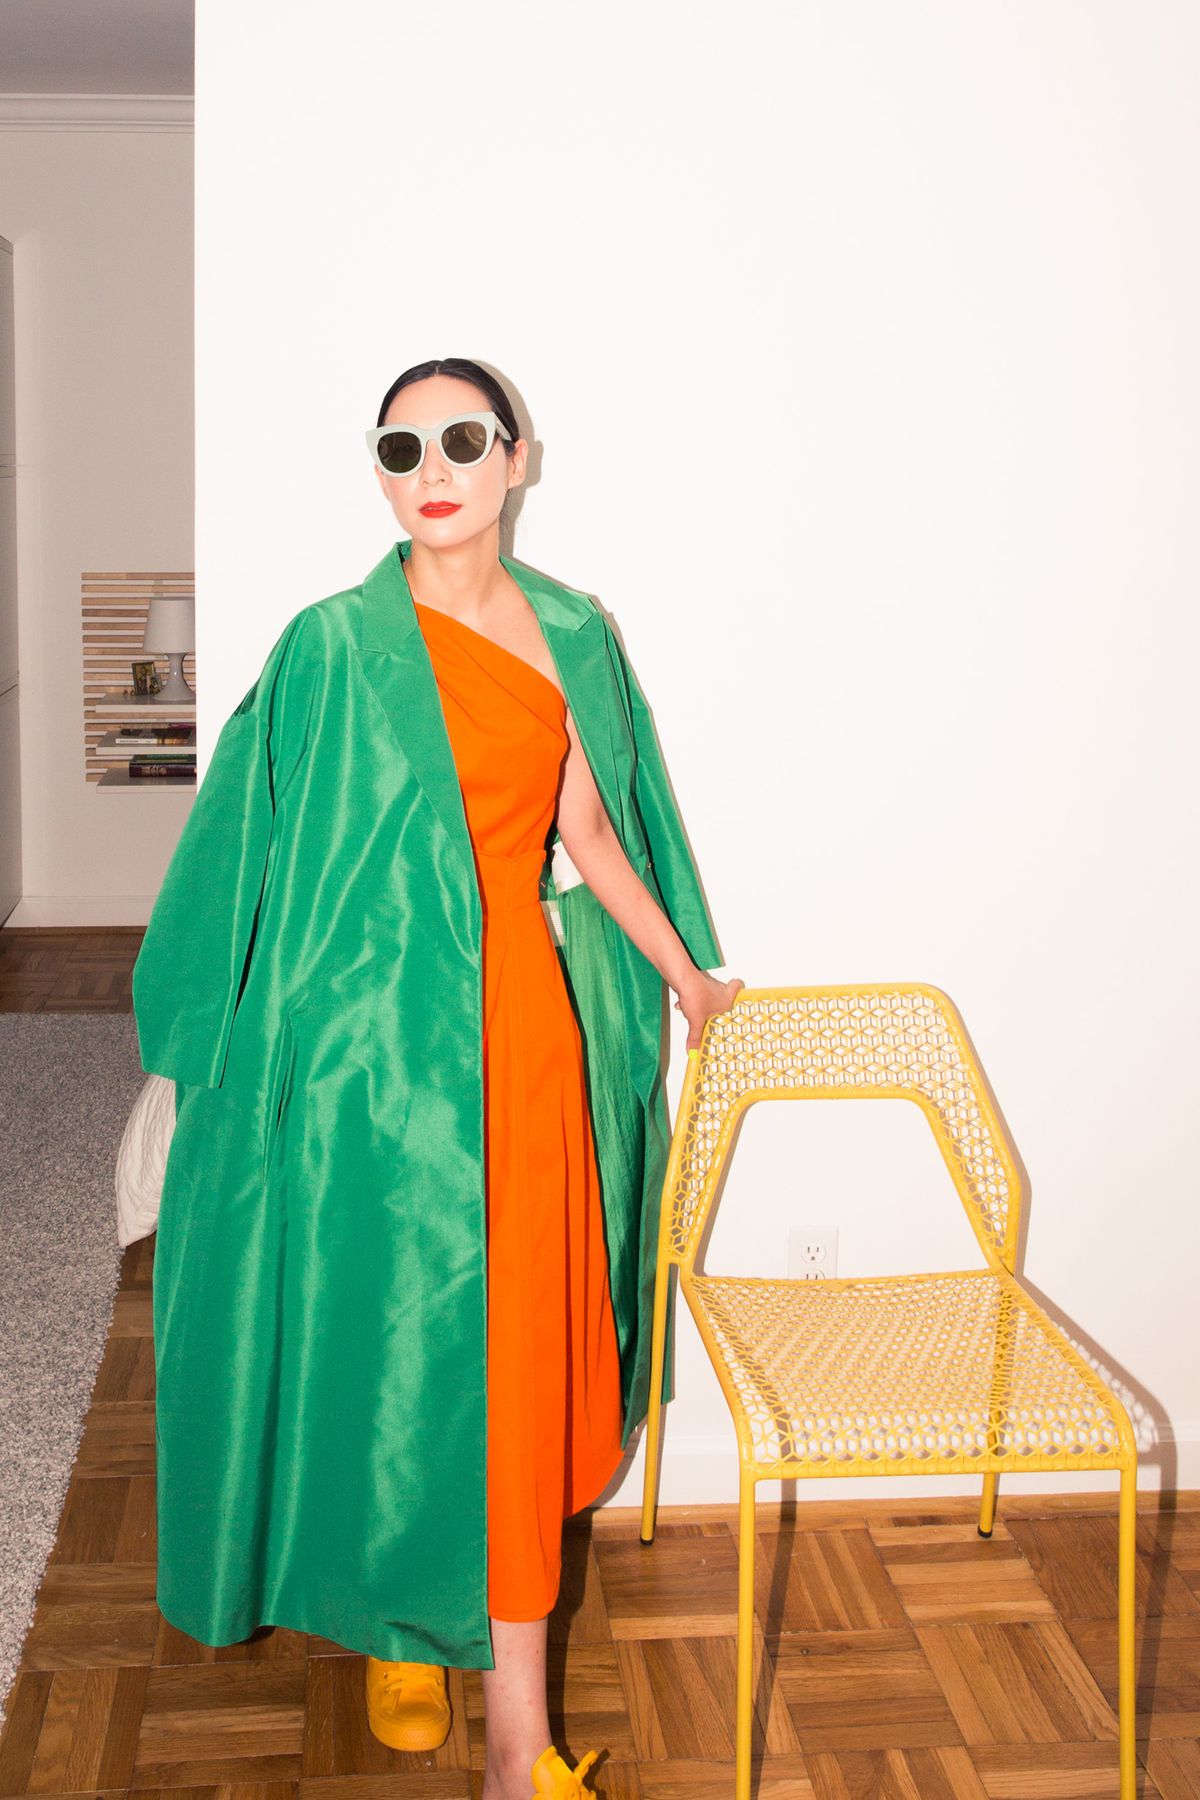 Architect Monling Lee’s Closet Is Filled with the Most Color You’ll See Today